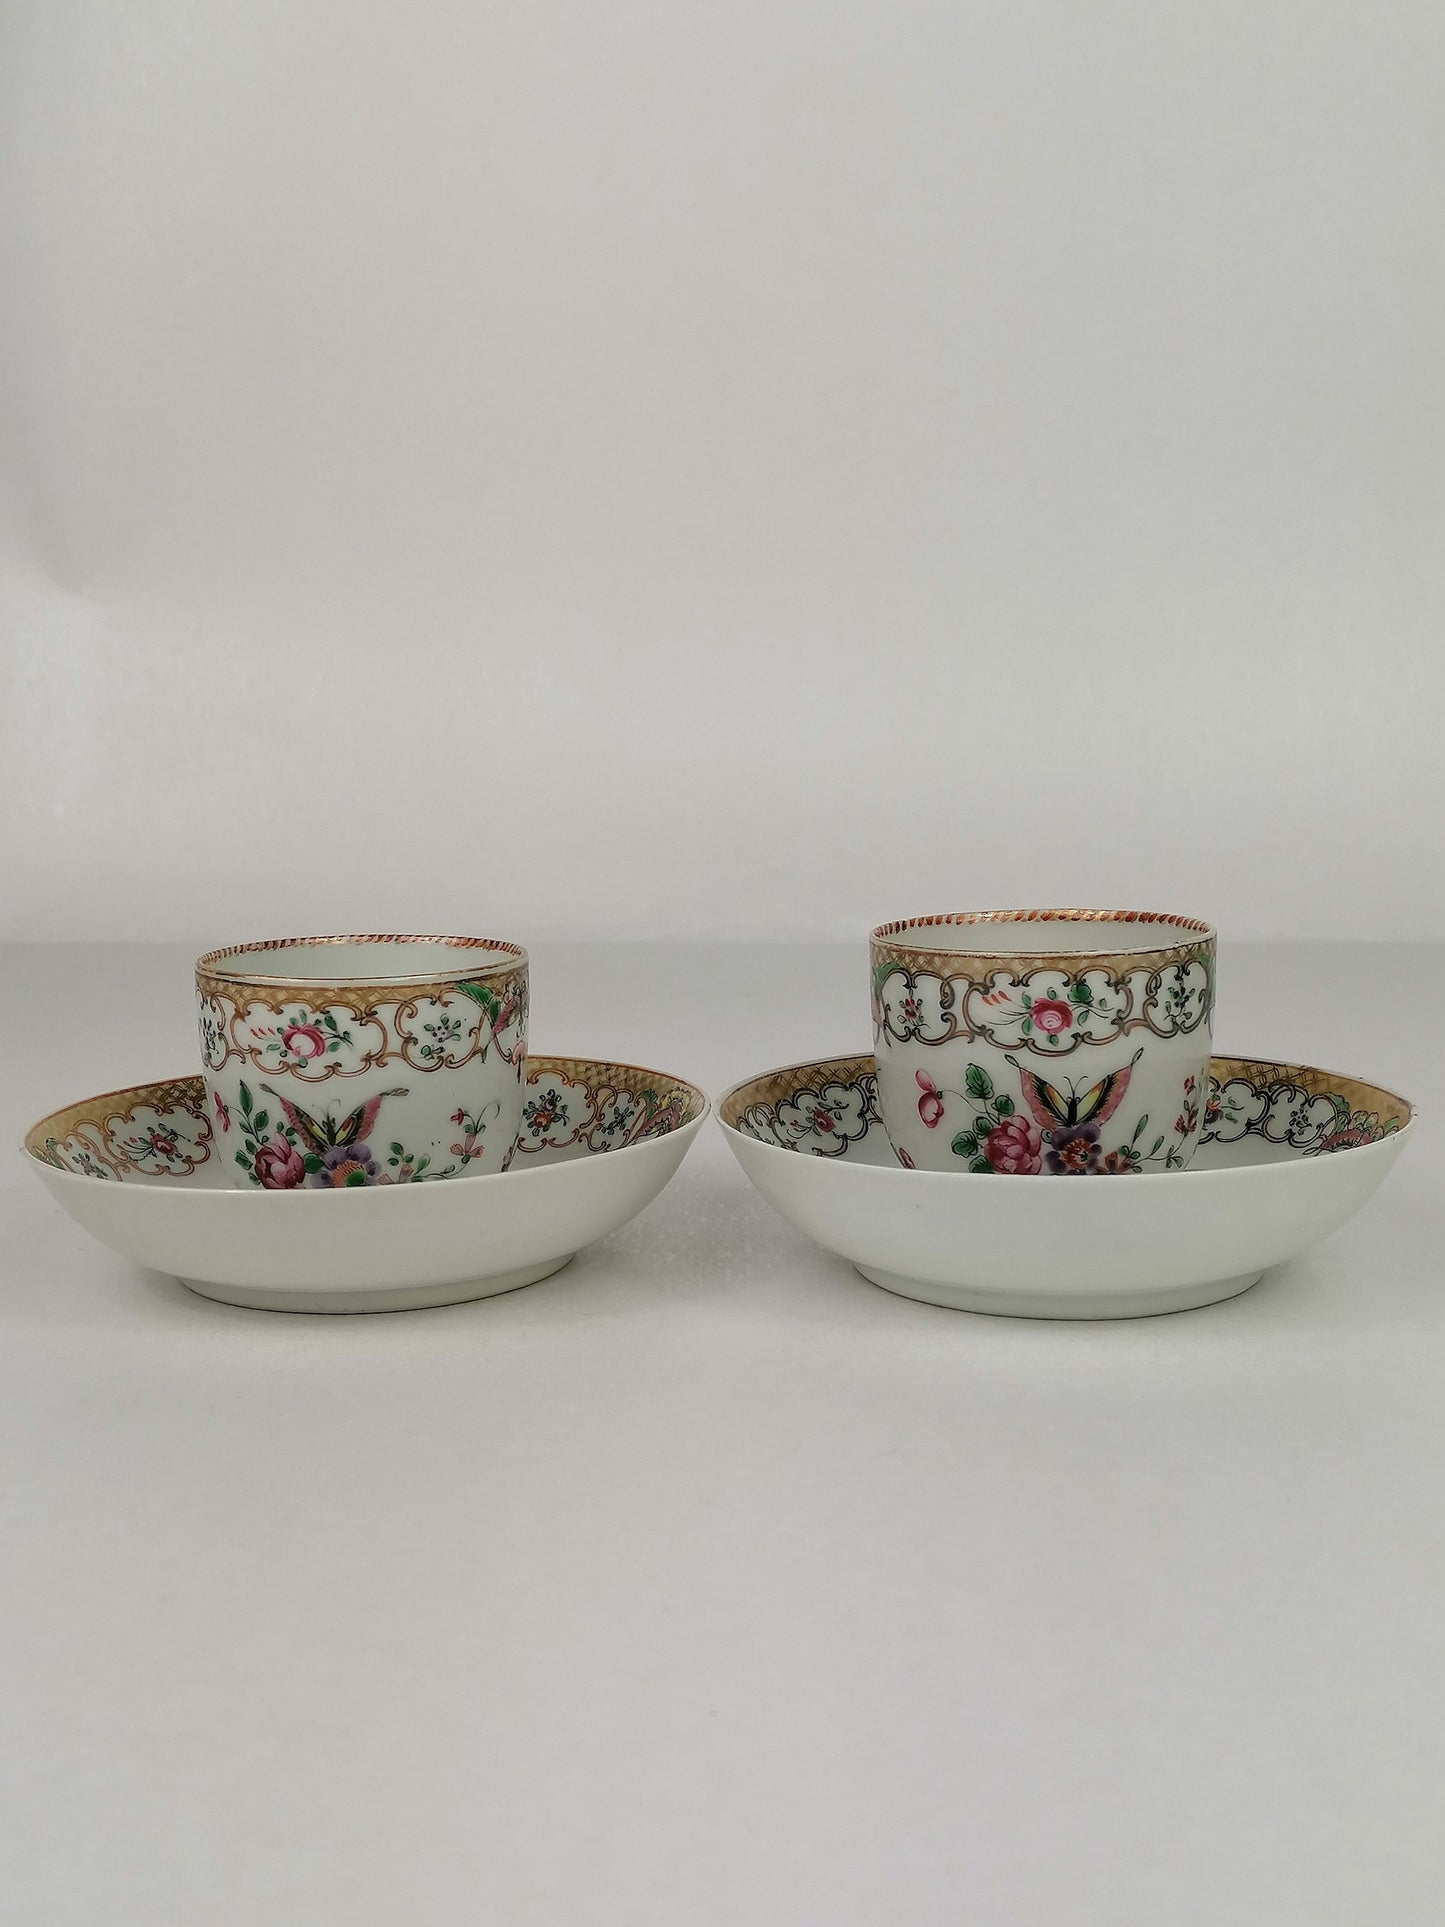 Antique set of 2 Chinese teacups and saucers // 18th century // Qing Dynasty